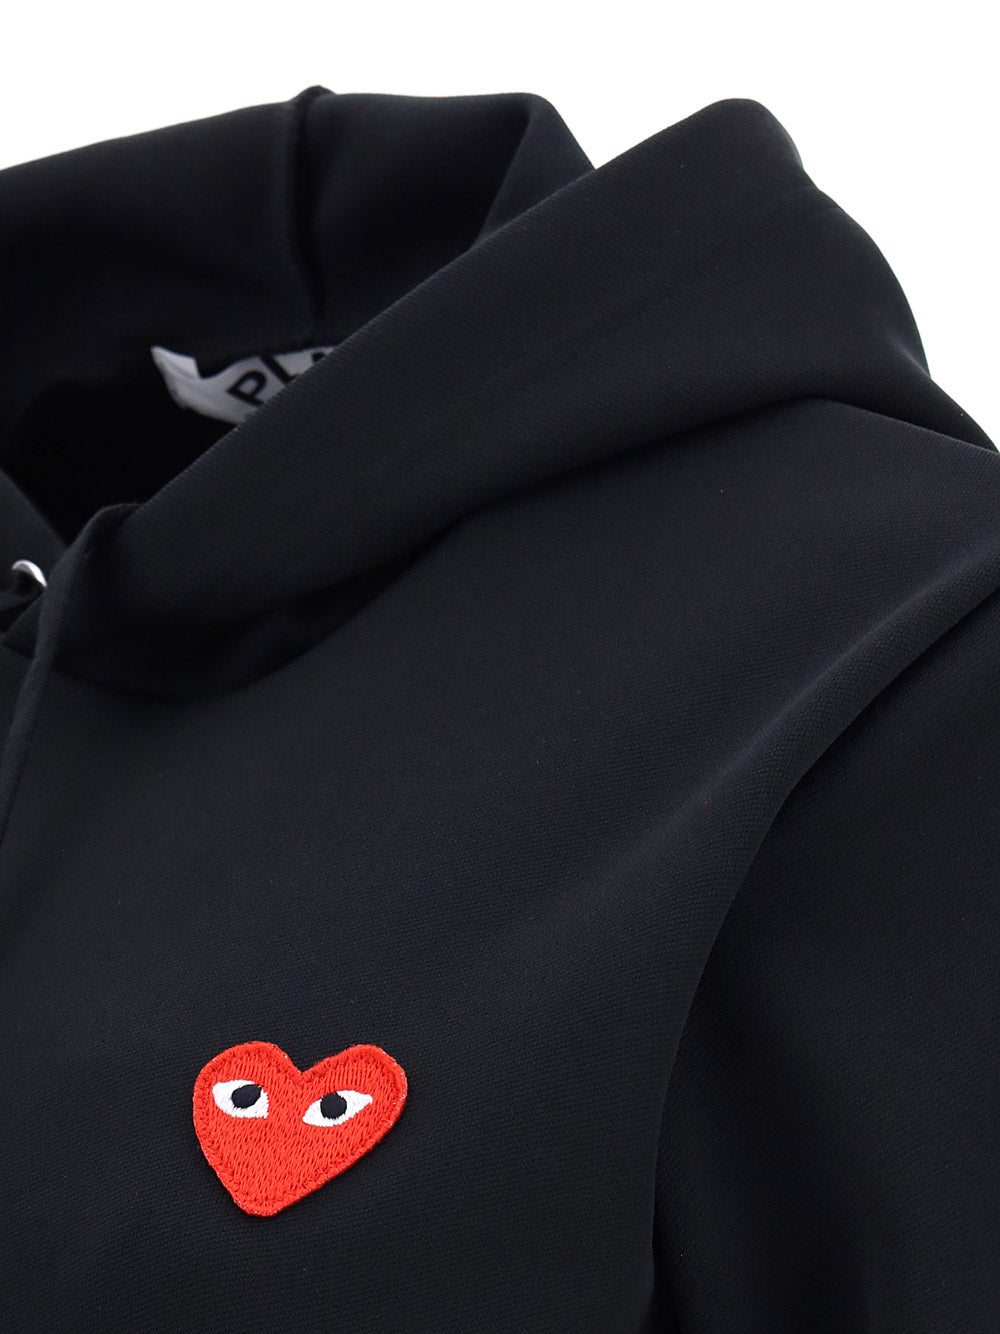 Heart-embroidered Pullover Hoodie - Black.